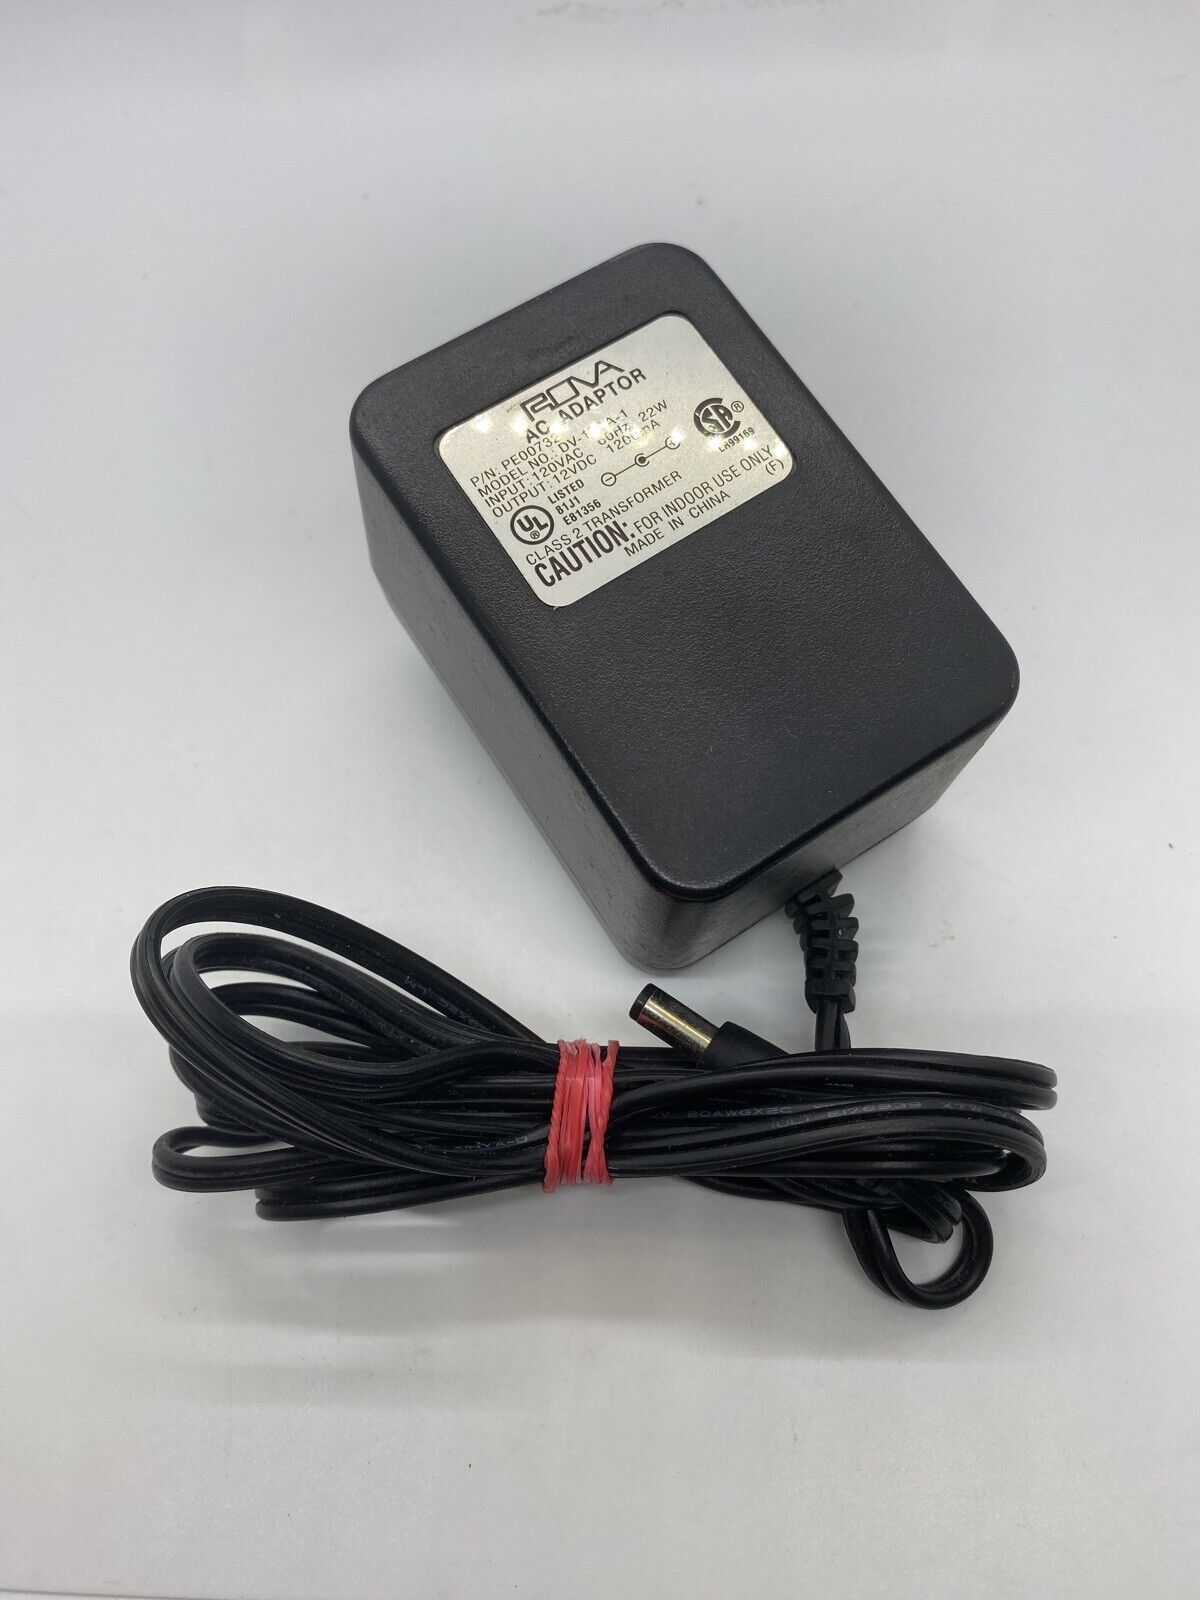 *Brand NEW* Output 12V 1200mA PE00732 Rova DV-151A-1 AC DC Power Supply Adapter Charger